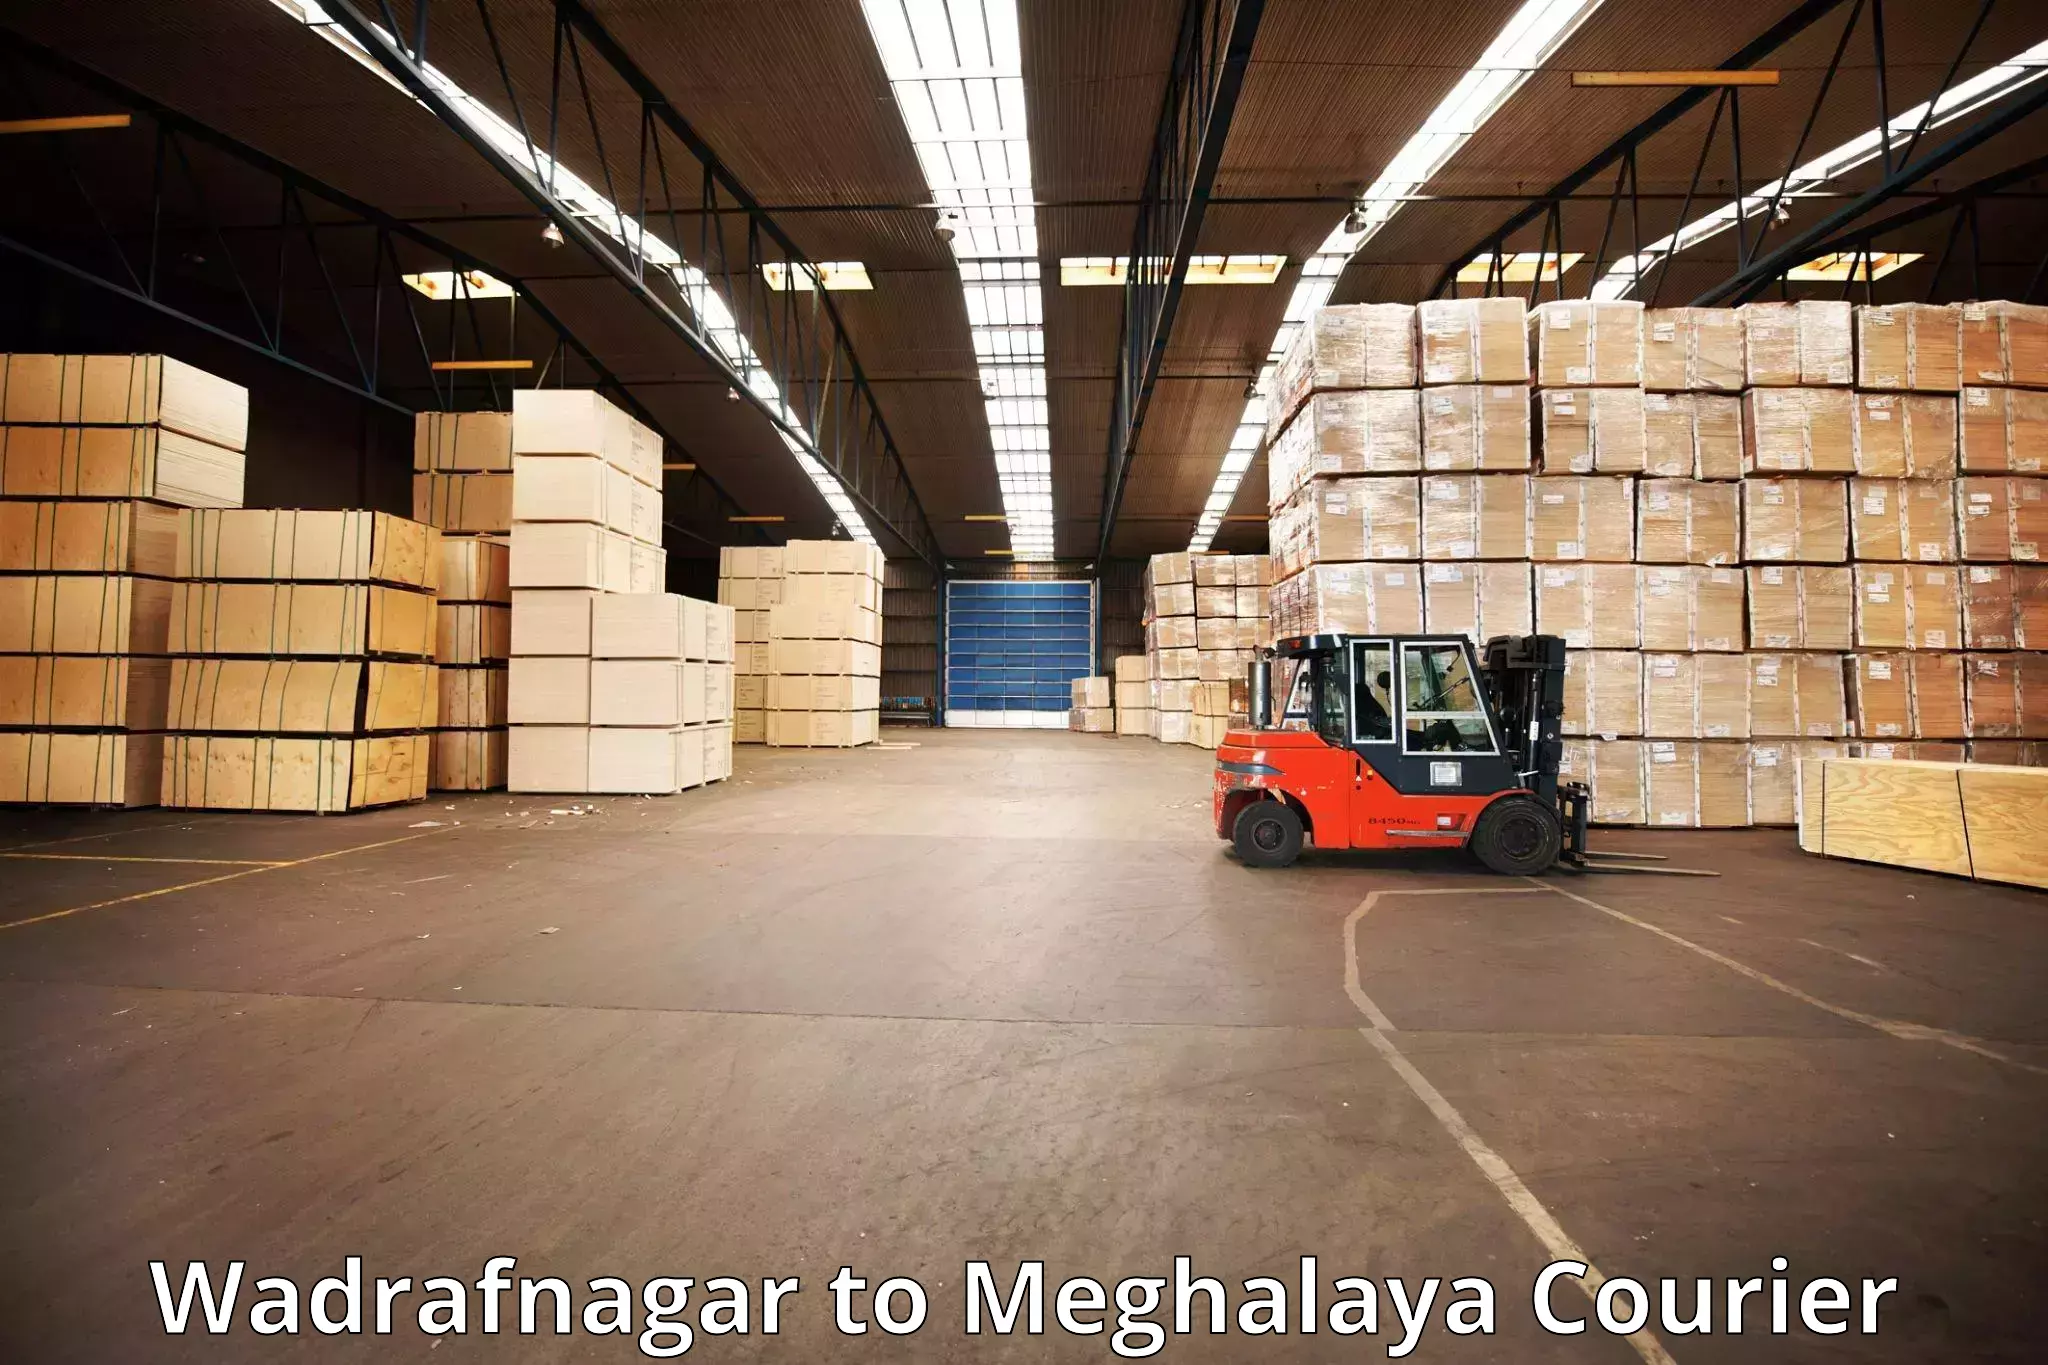 Baggage shipping experience Wadrafnagar to Nongstoin